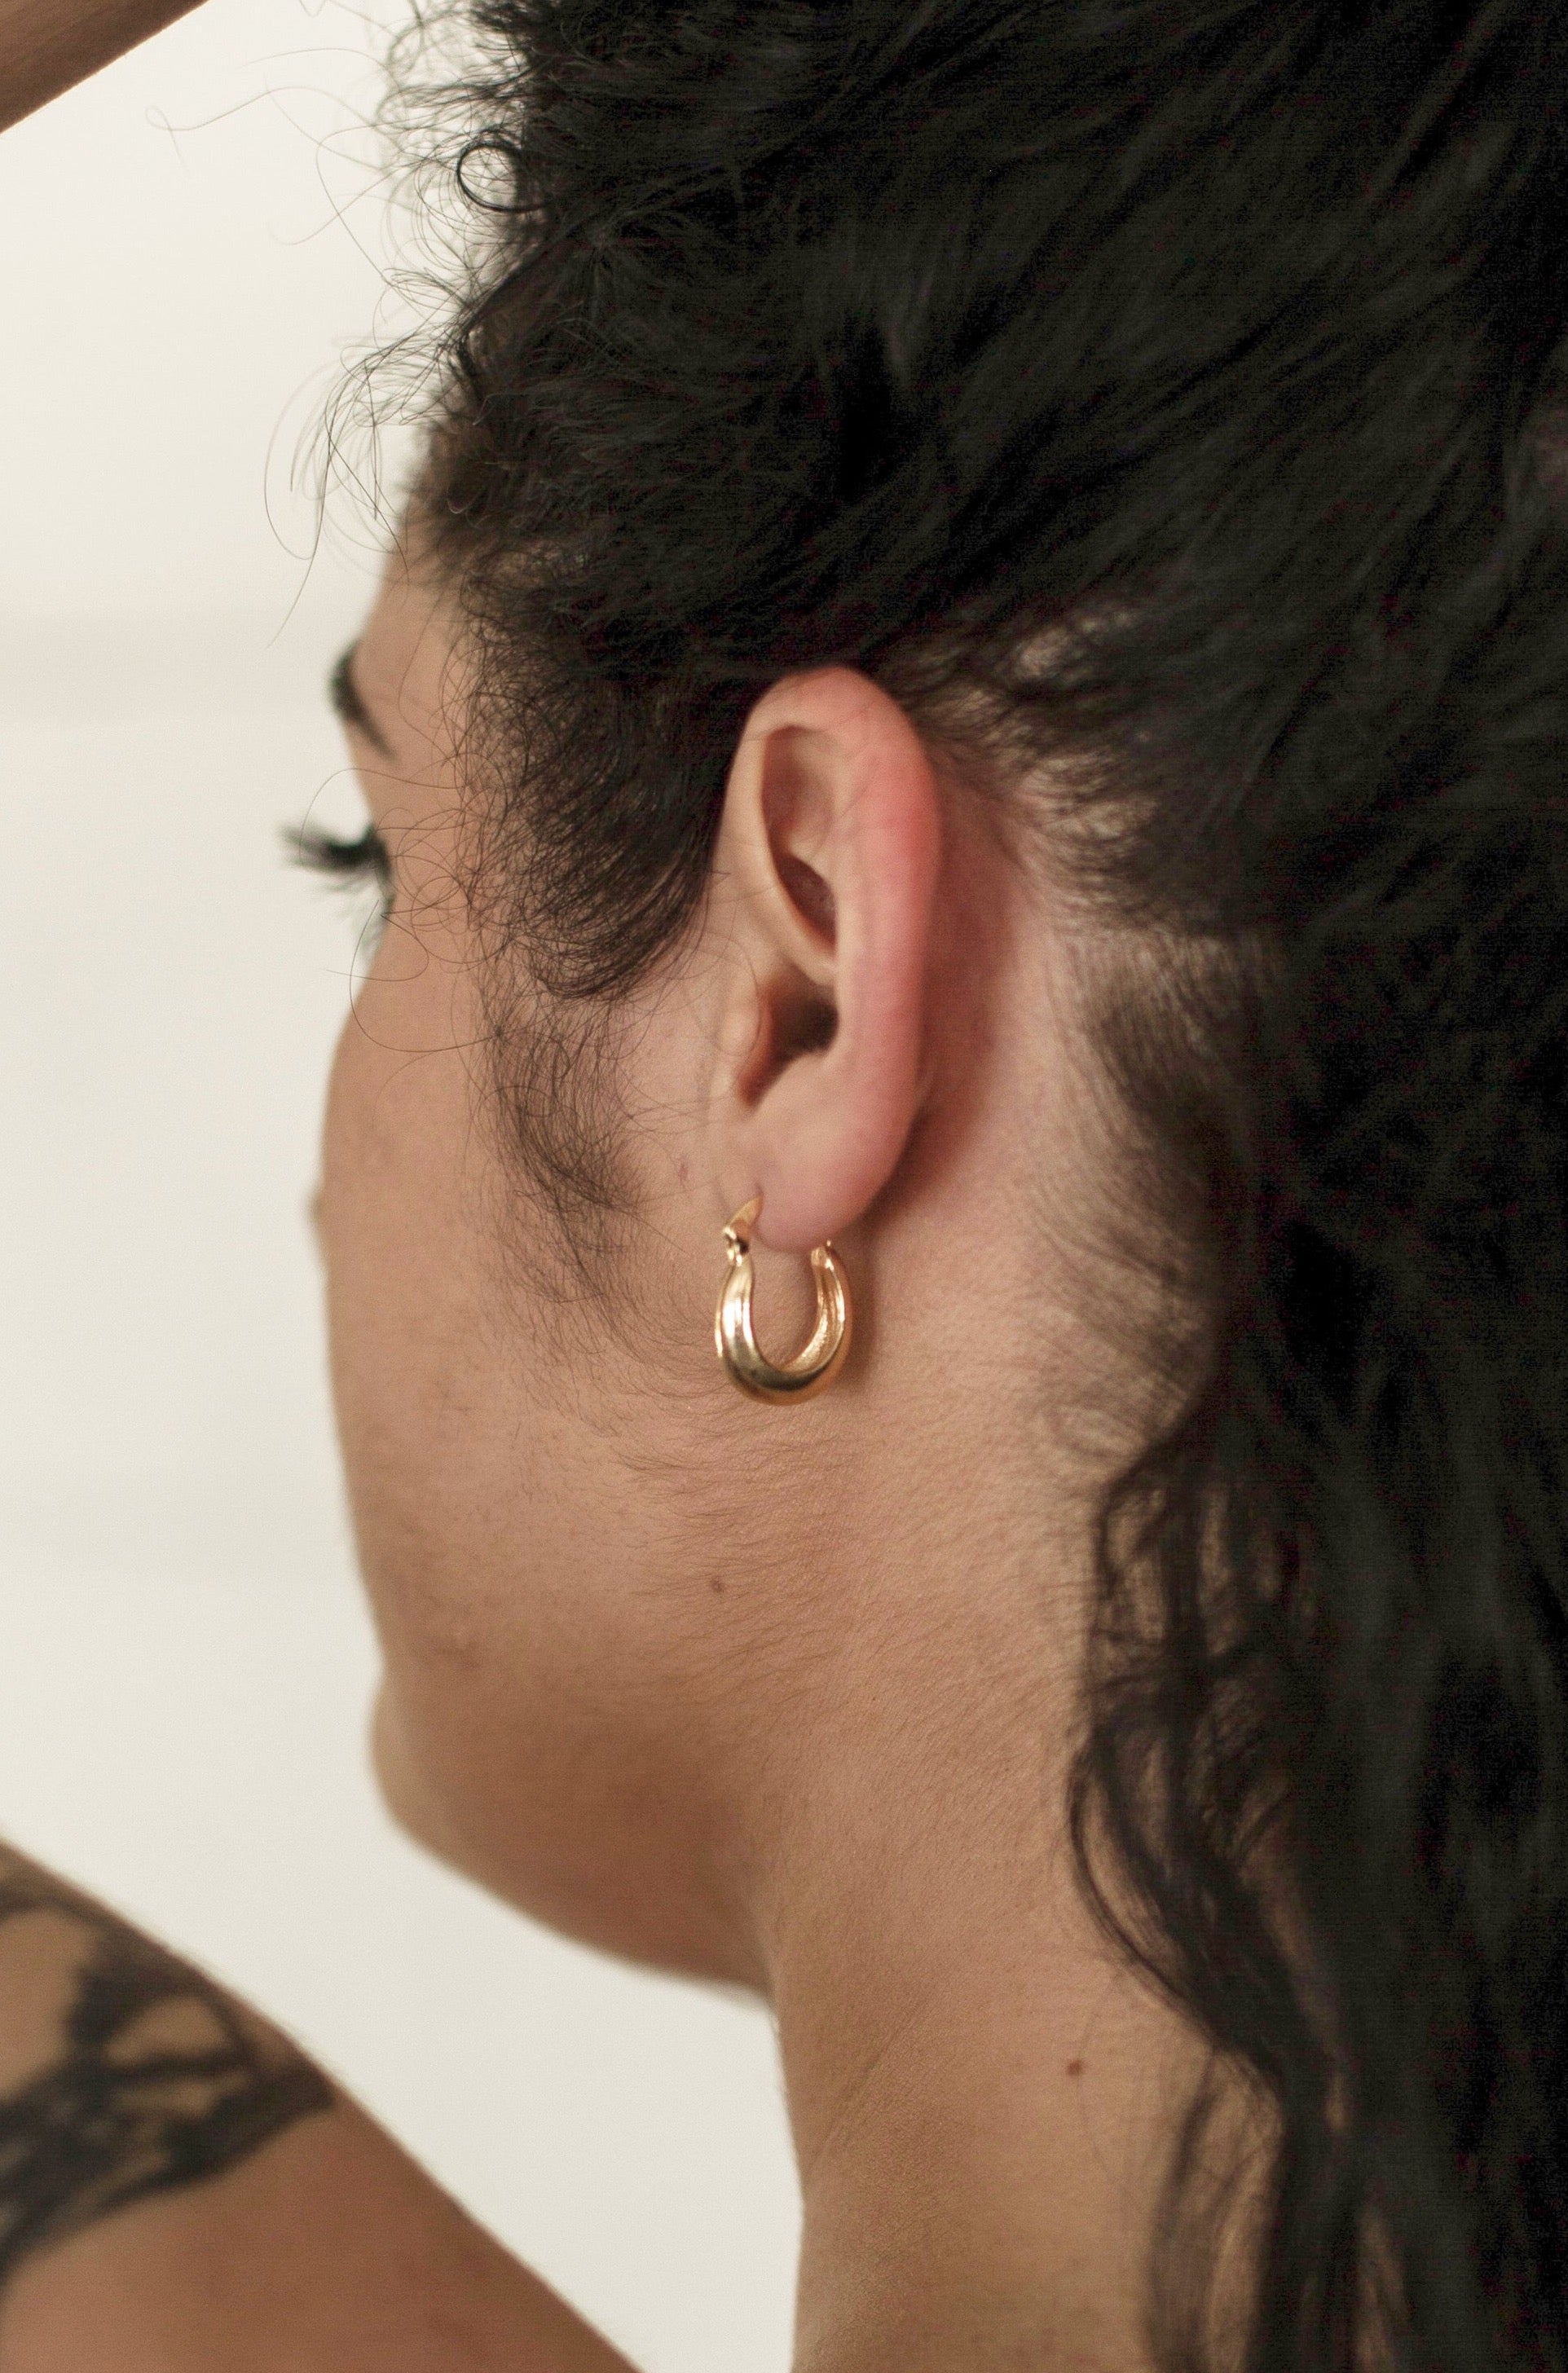 A model wearing the earrings, photographed from behind, showcasing the true size of the earring.